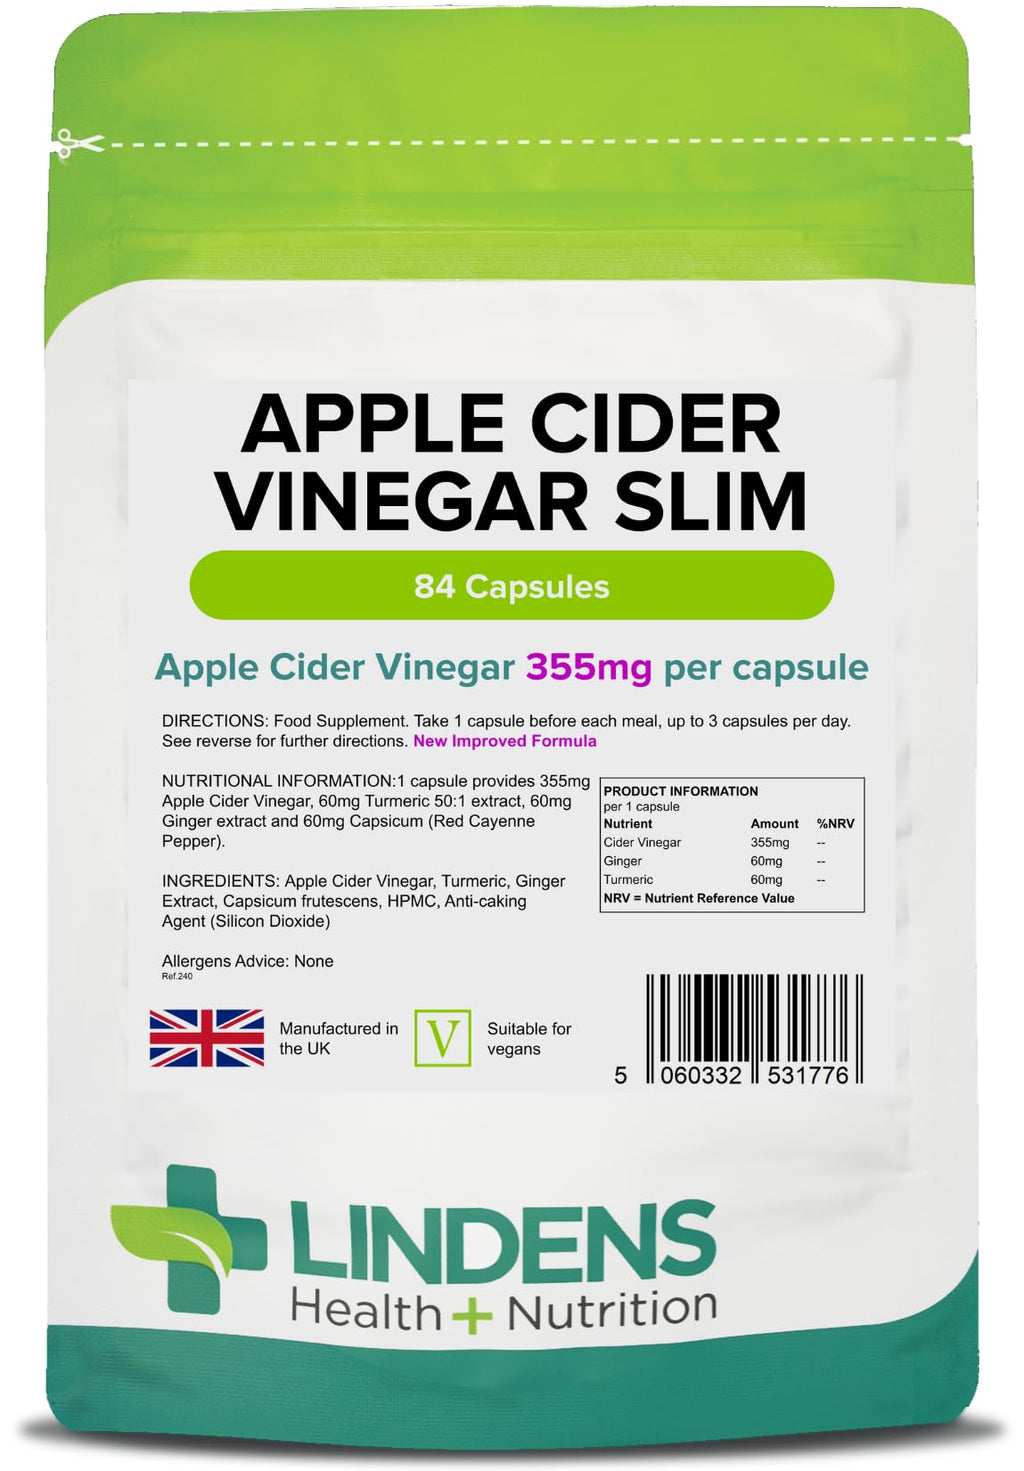 [Australia] - Lindens Apple Cider Vinegar Slim Capsules - 84 Pack - Contributes to Healthy Metabolism, Healthy Thyroid Function, Reduction of Tiredness & Fatigue - UK Manufacturer, Letterbox Friendly 